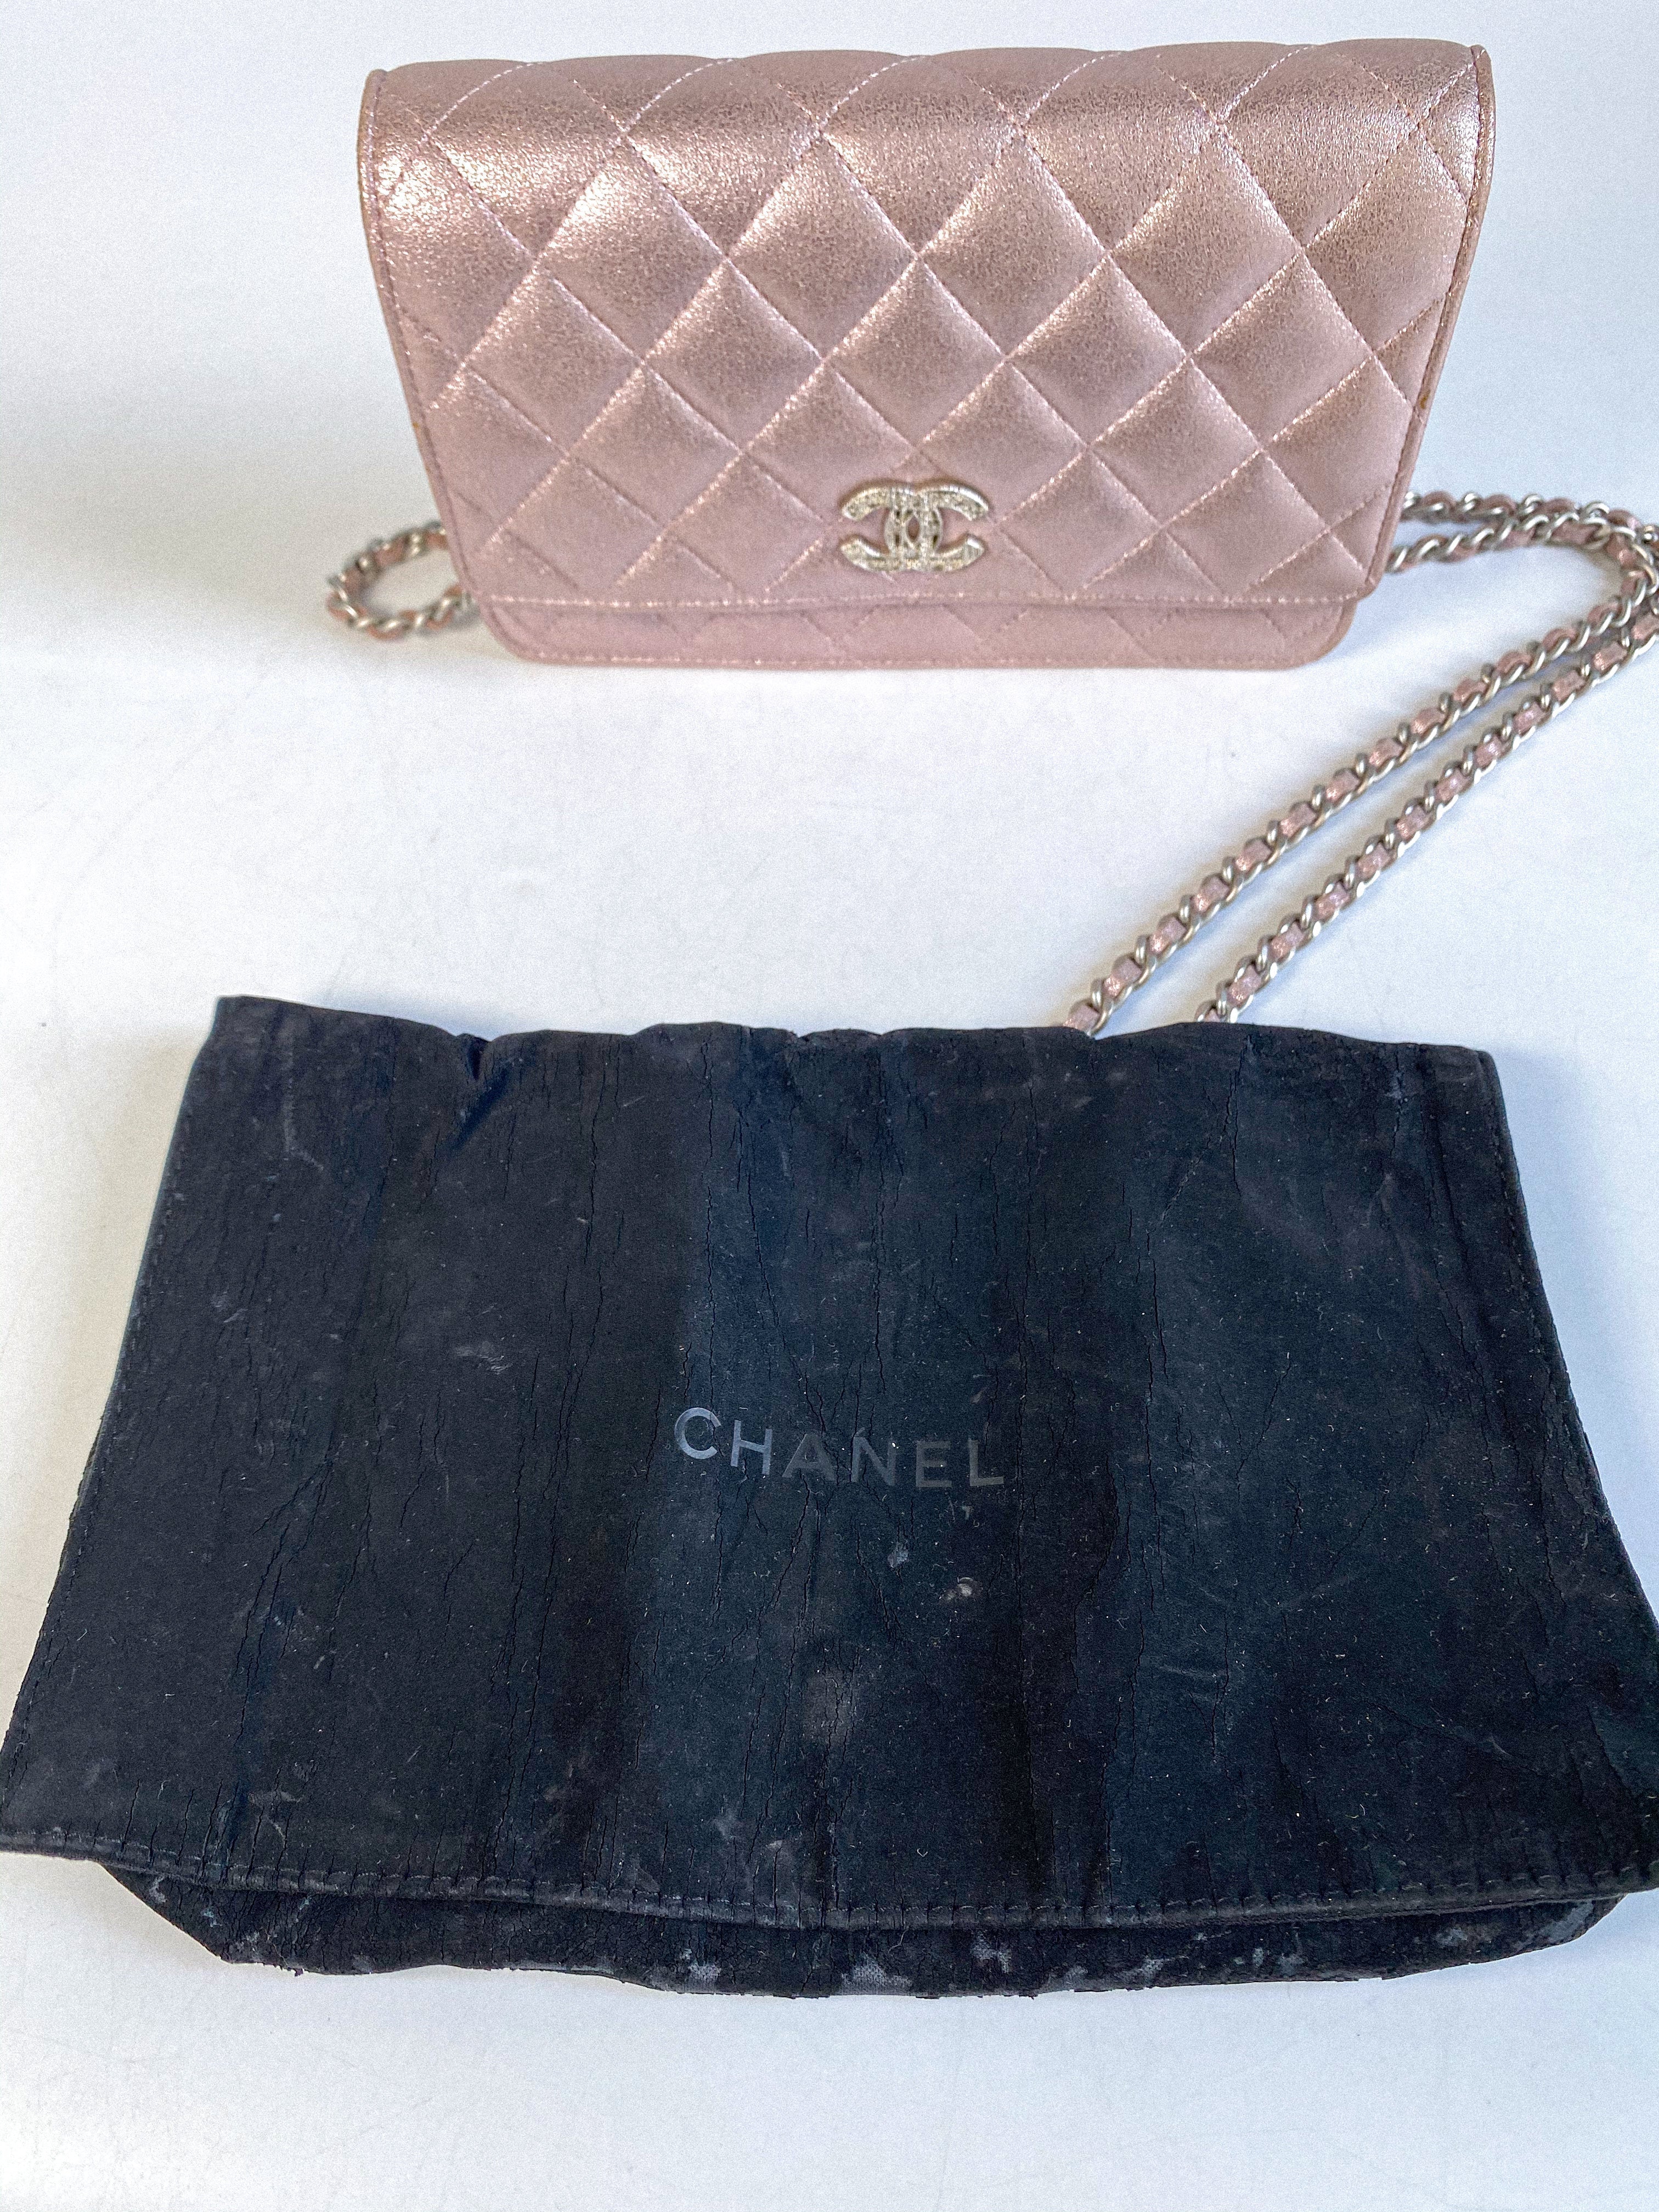 Chanel CC Wallet on Chain in Iridescent Pink Calfskin and Silver Hardware Series 21